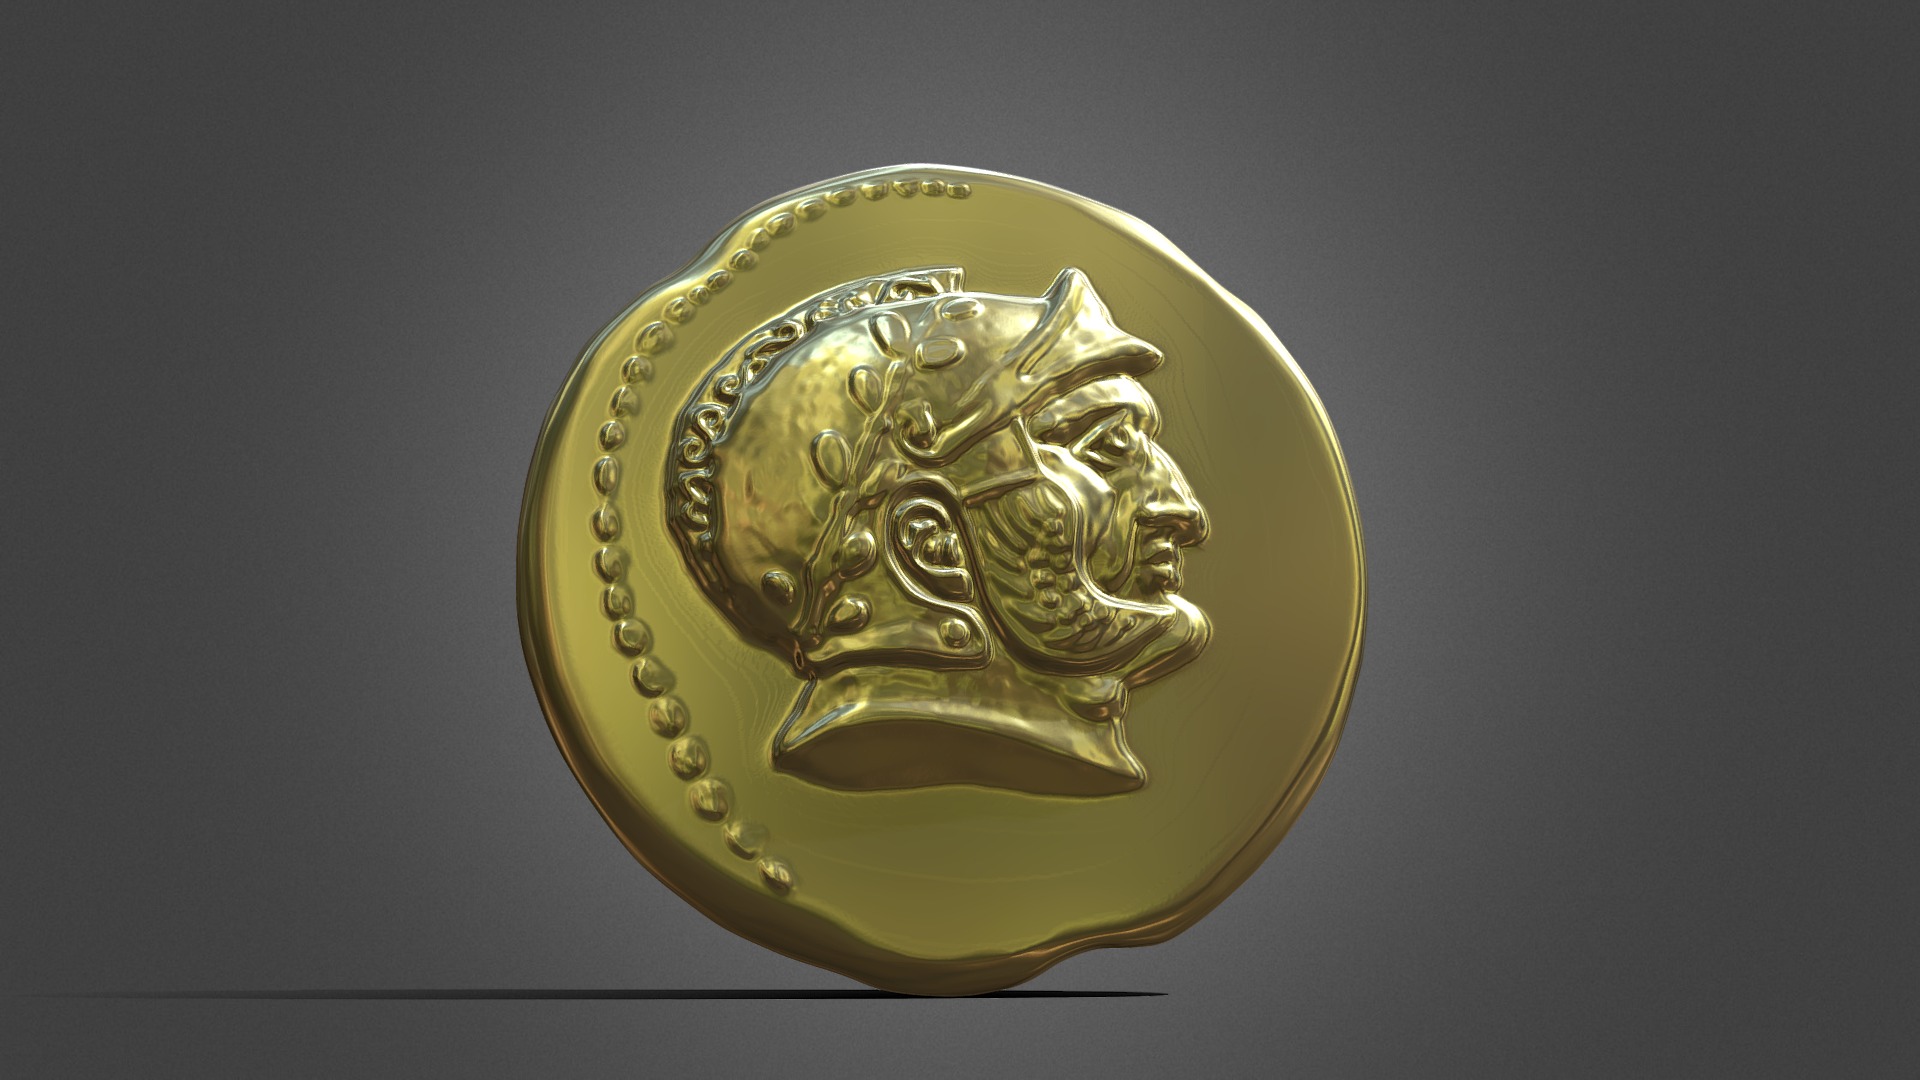 3D model Rome Coin 2 Higher Relief - This is a 3D model of the Rome Coin 2 Higher Relief. The 3D model is about a gold coin with a lion on it.